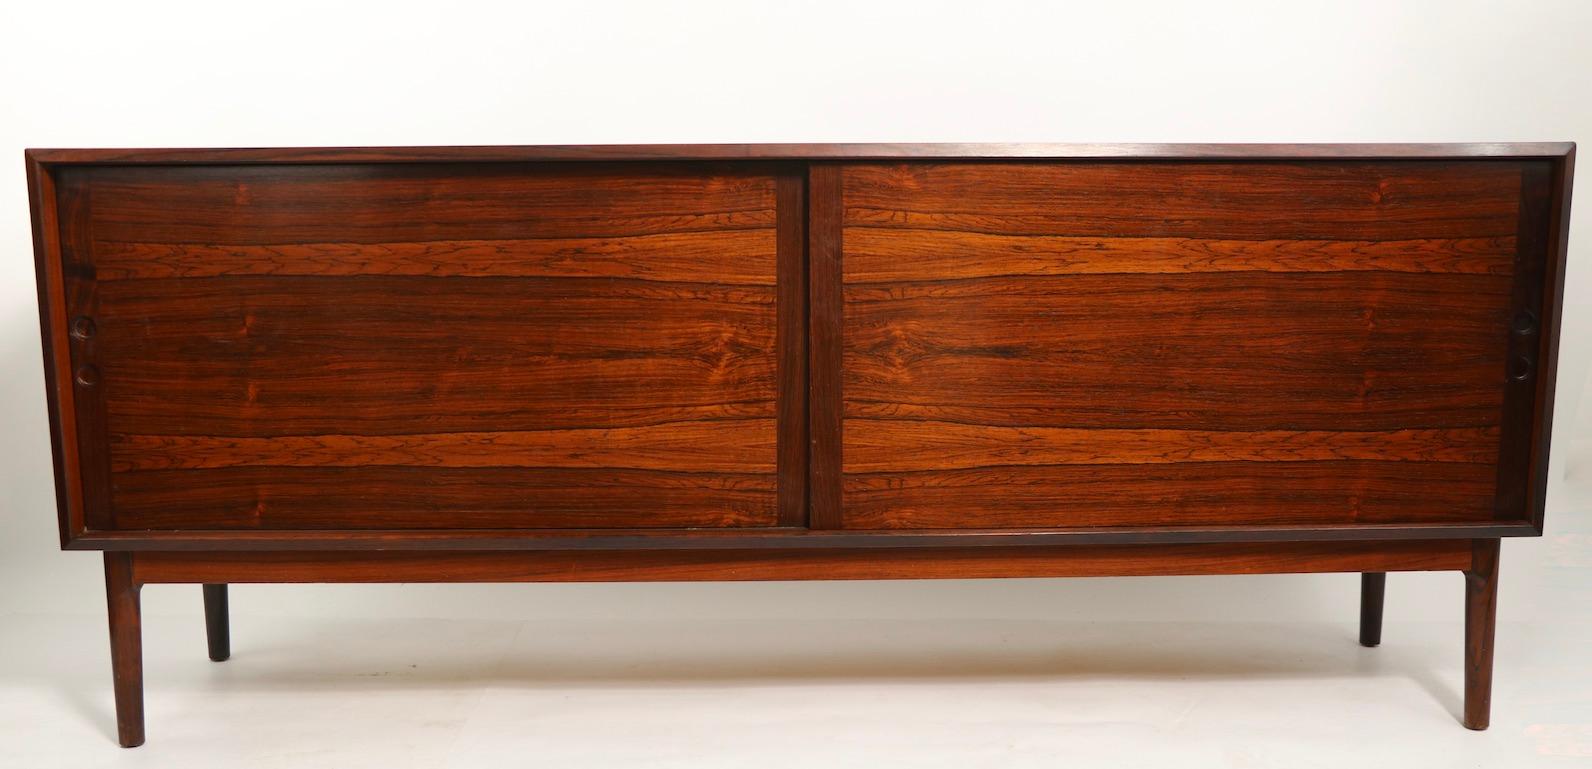 20th Century Rosewood Credenza in the Danish Modern Style Made in Norway Westnofa Attributed